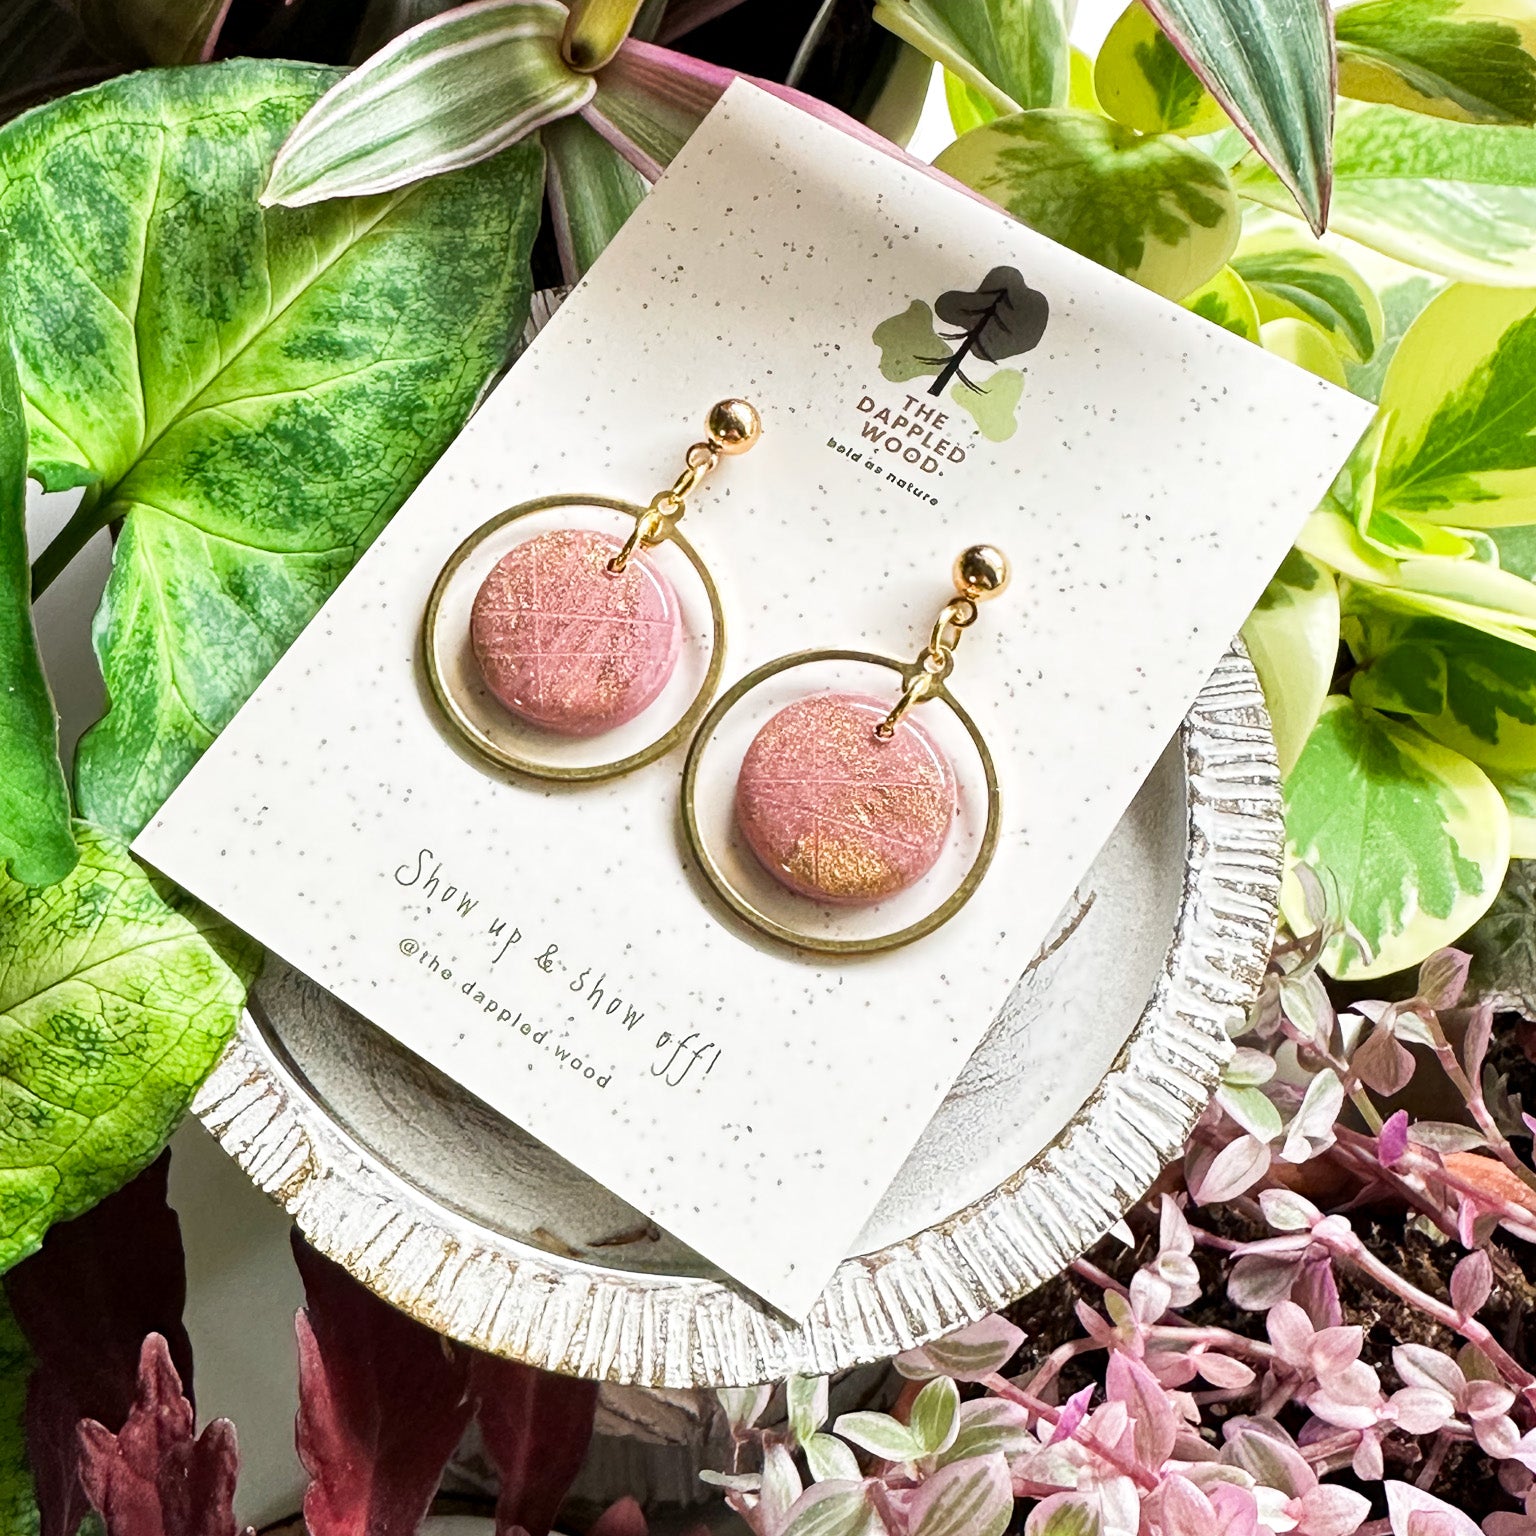 Handcrafted 'Michele' polymer clay earrings featuring shimmering pink circular pendants with gold hoops, displayed on a speckled white card with nature-inspired 'The Dappled Wood' branding, complemented by a lush backdrop of green and pink foliage.